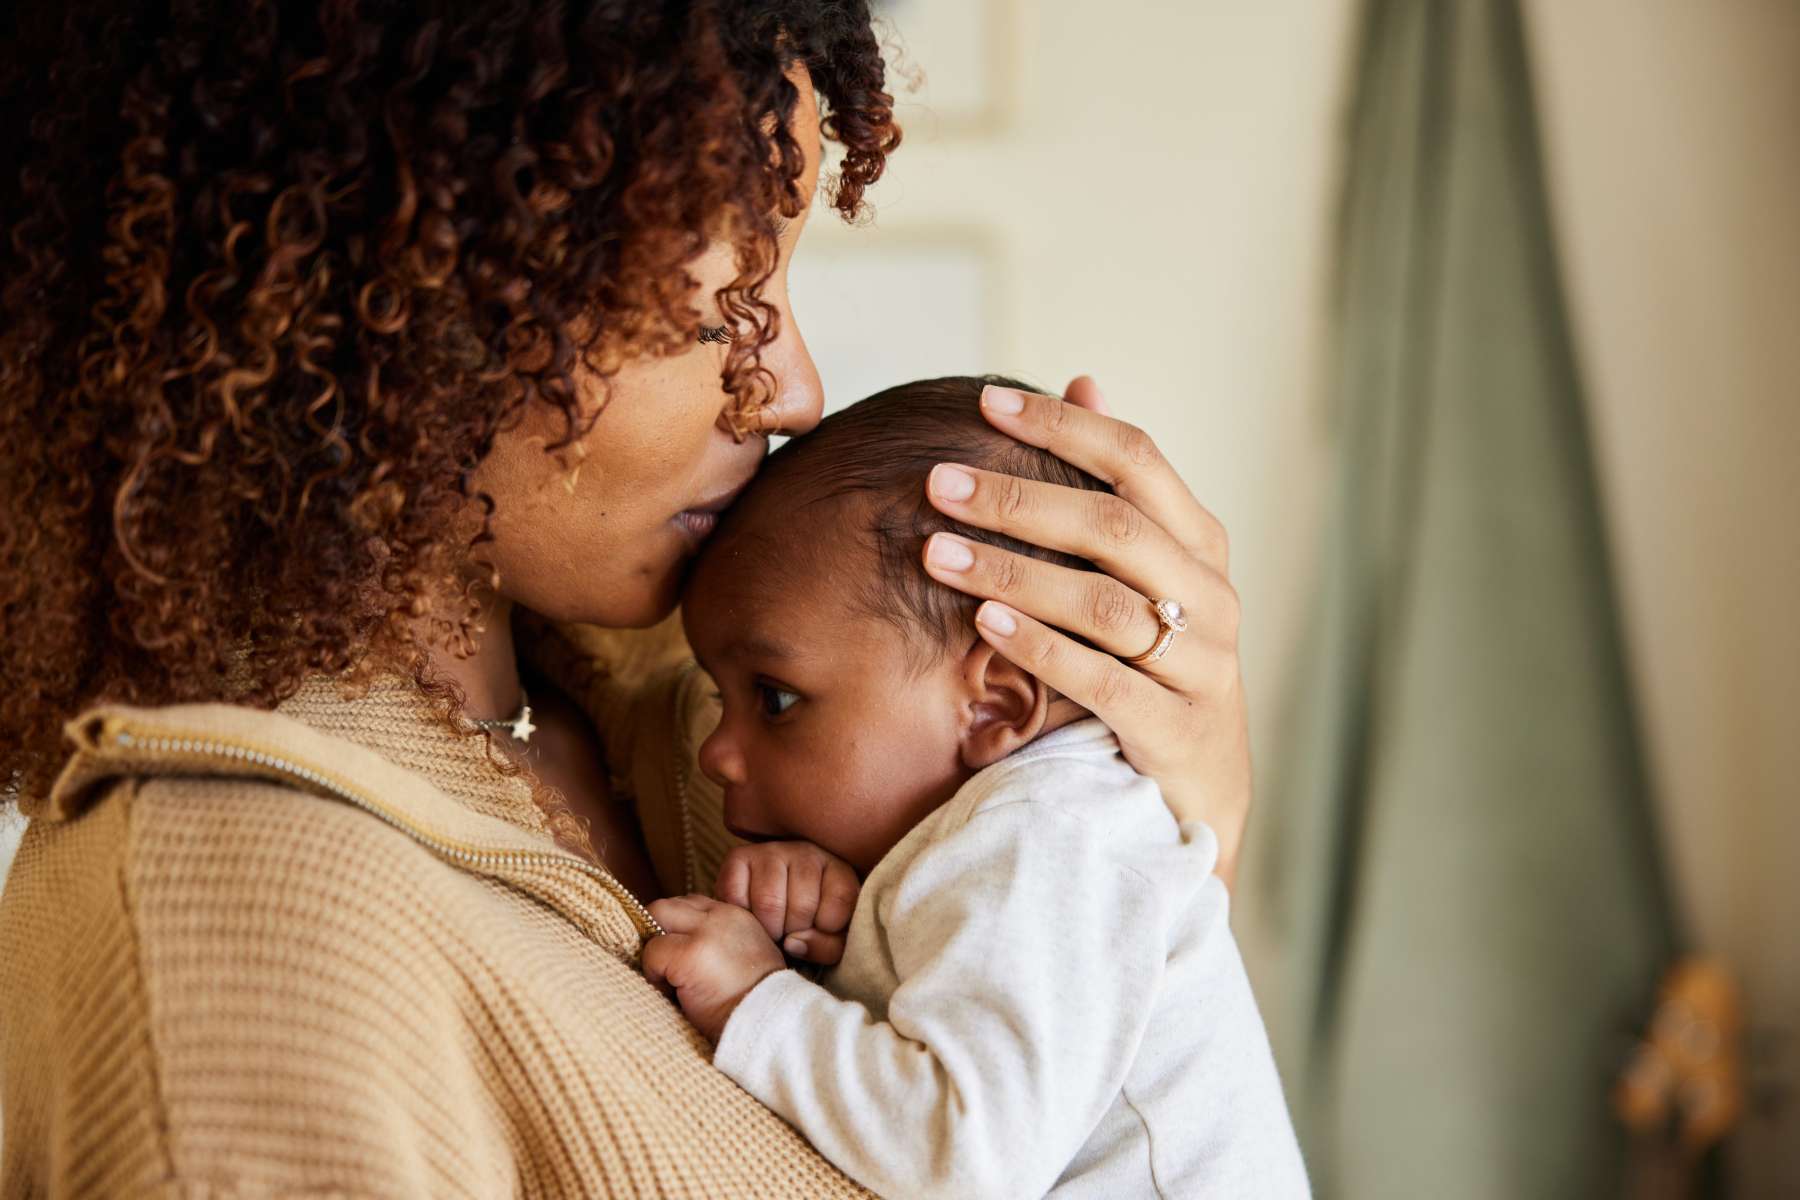 Rhode Island News: RI KIDS COUNT releases a report on racial and ethnic disparities in maternal, infant, and young children’s health